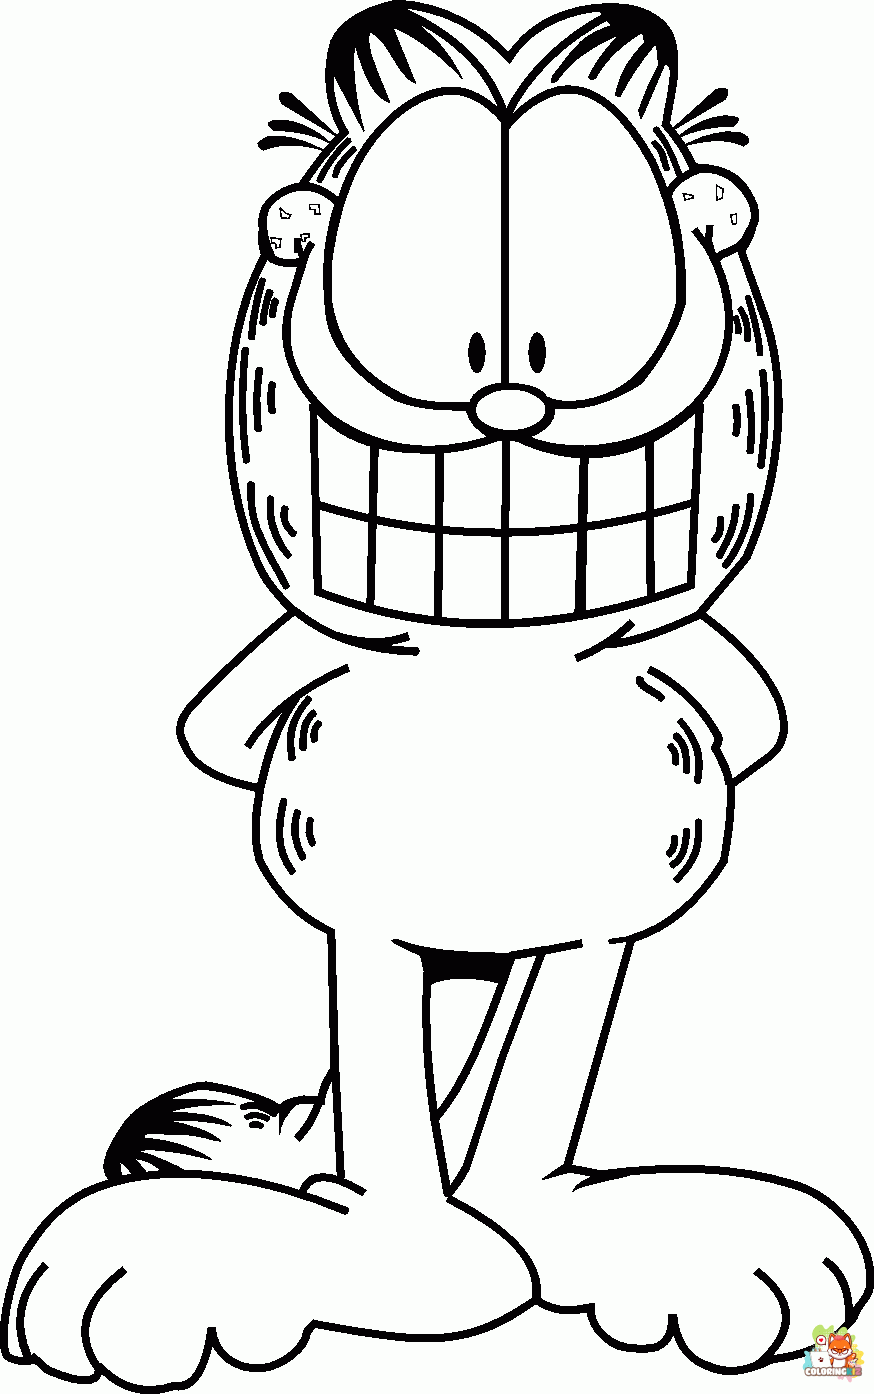 Free Garfield coloring pages for kids